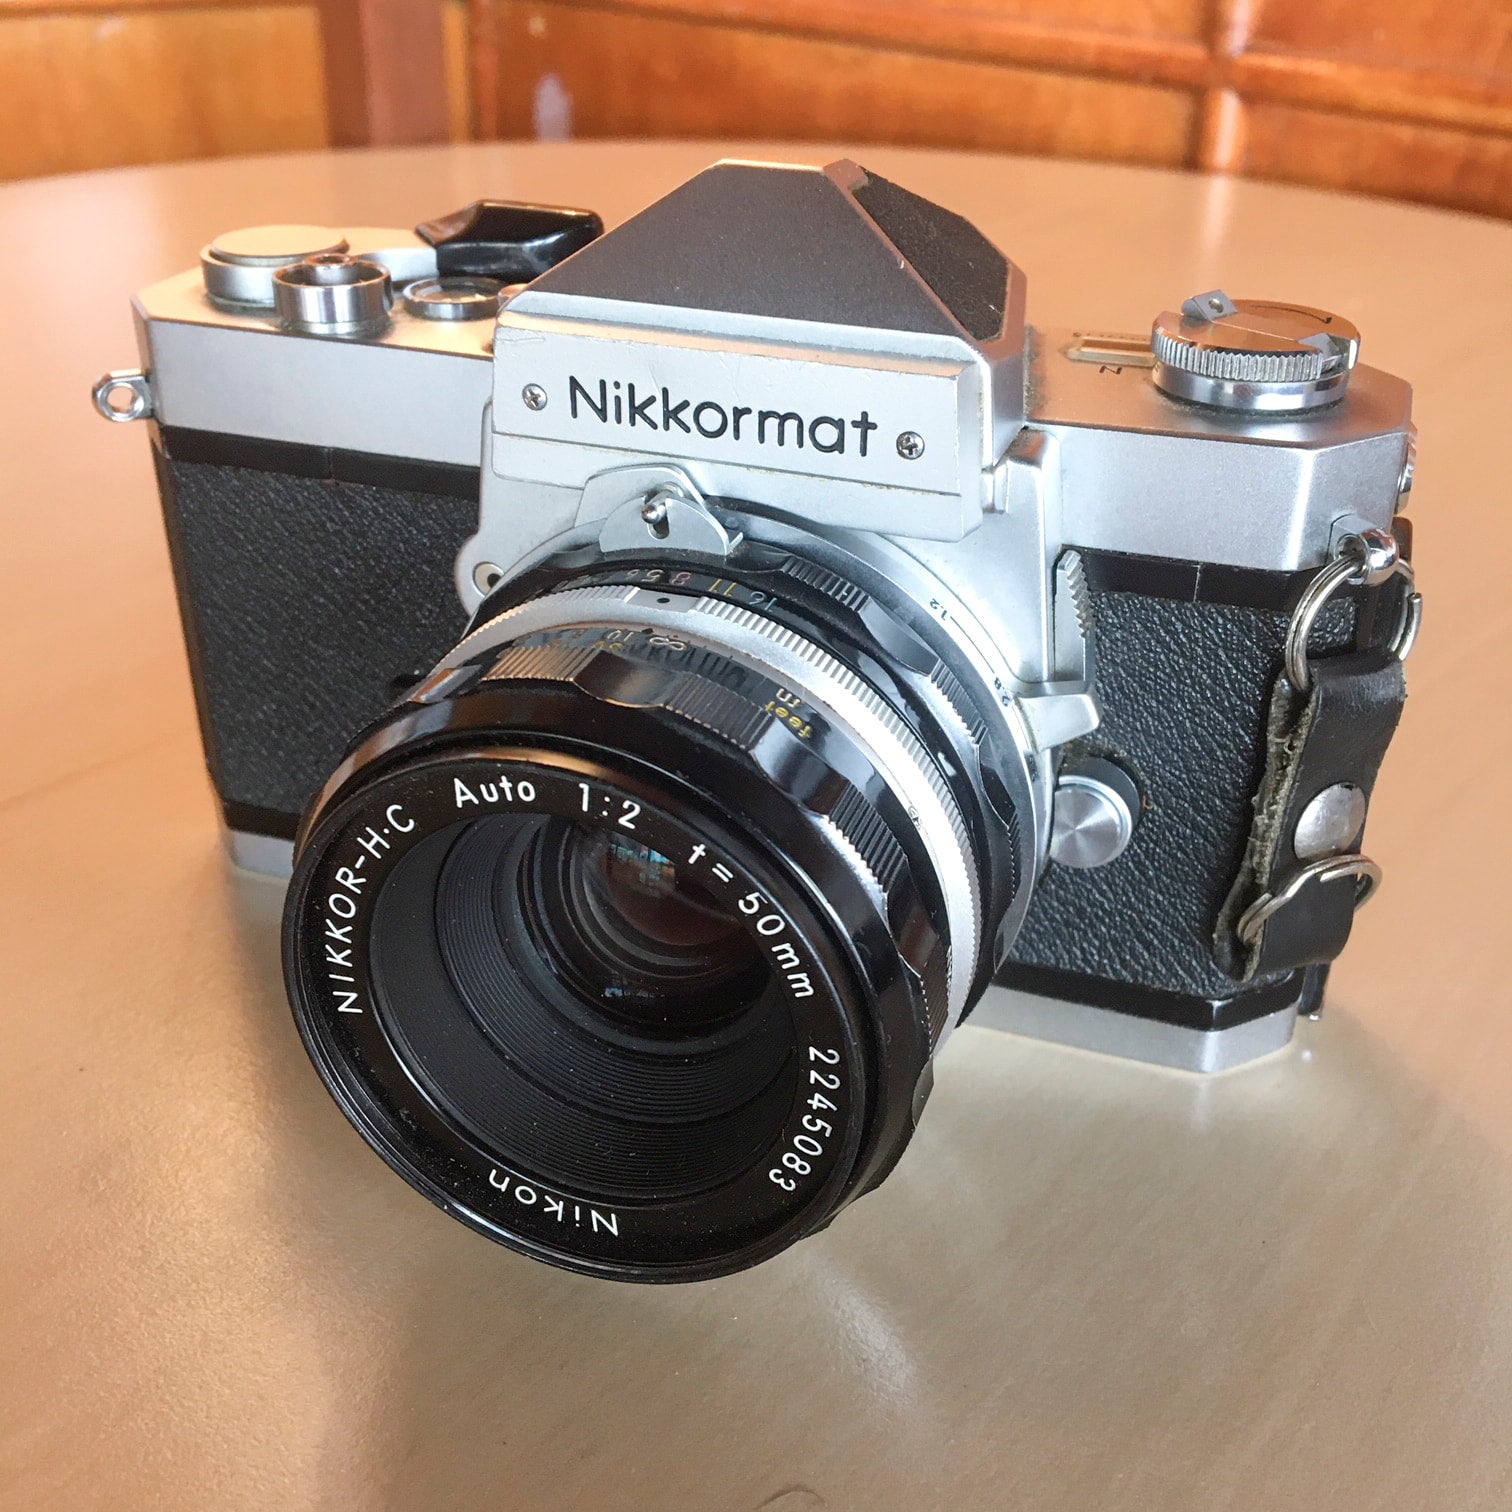 Nikkormat FTN with 50mm f2 non Ai lens